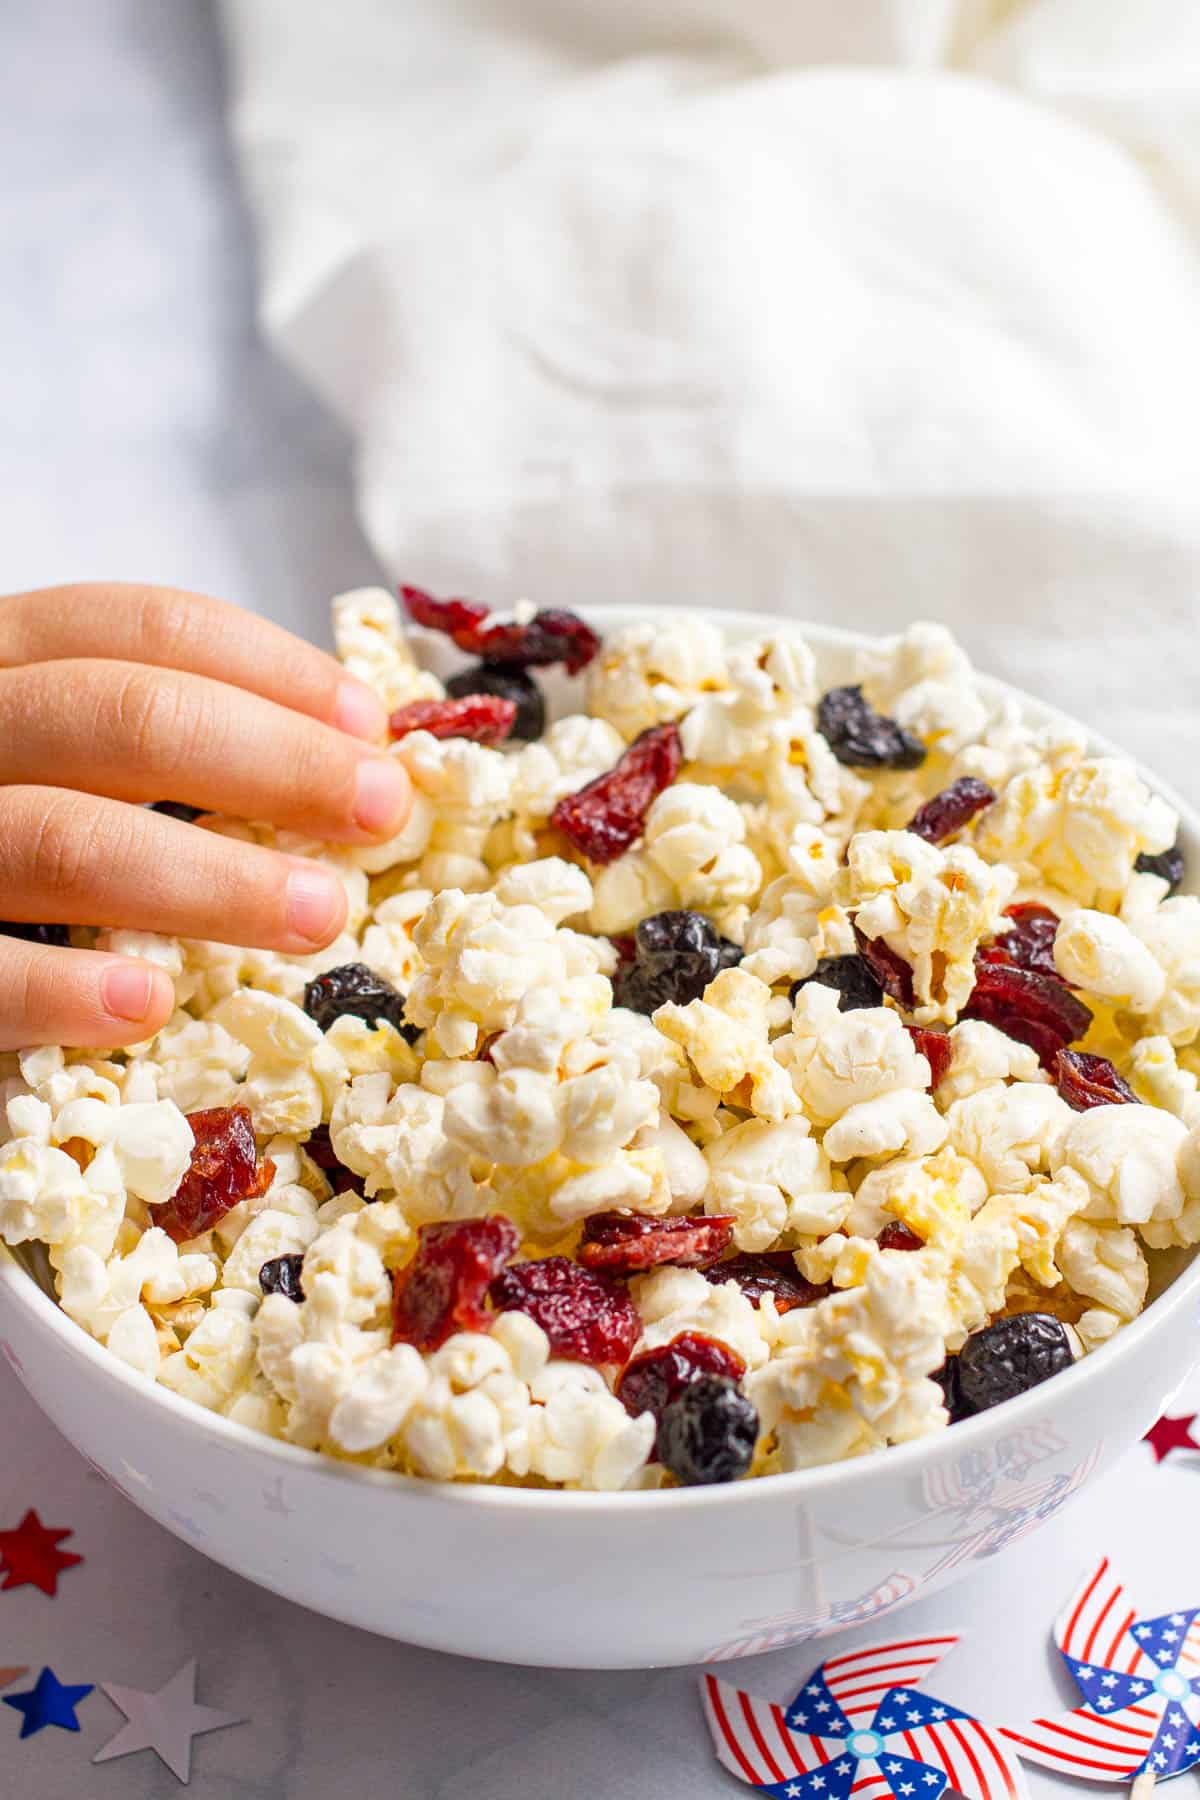 A small hand reaching into a white bowl of popcorn mixed with dried blueberries and dried cranberries.